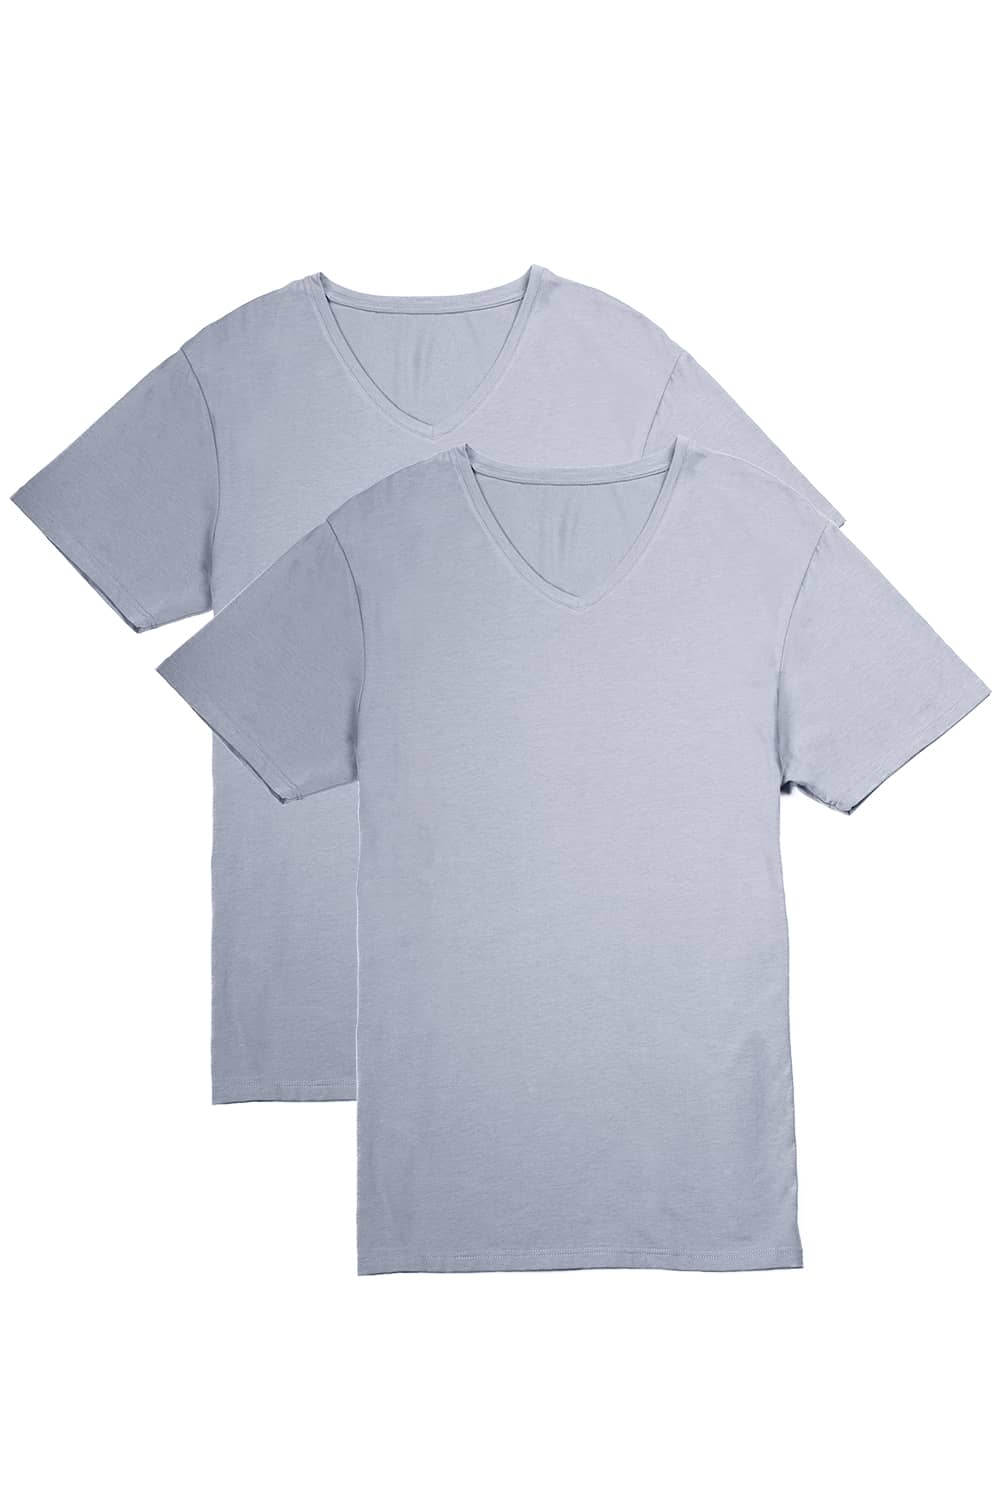 Men's Classic Fit Soft Stretch V-Neck Undershirt Mens>Casual>Tops Fishers Finery Sky Gray Small 2 Pack